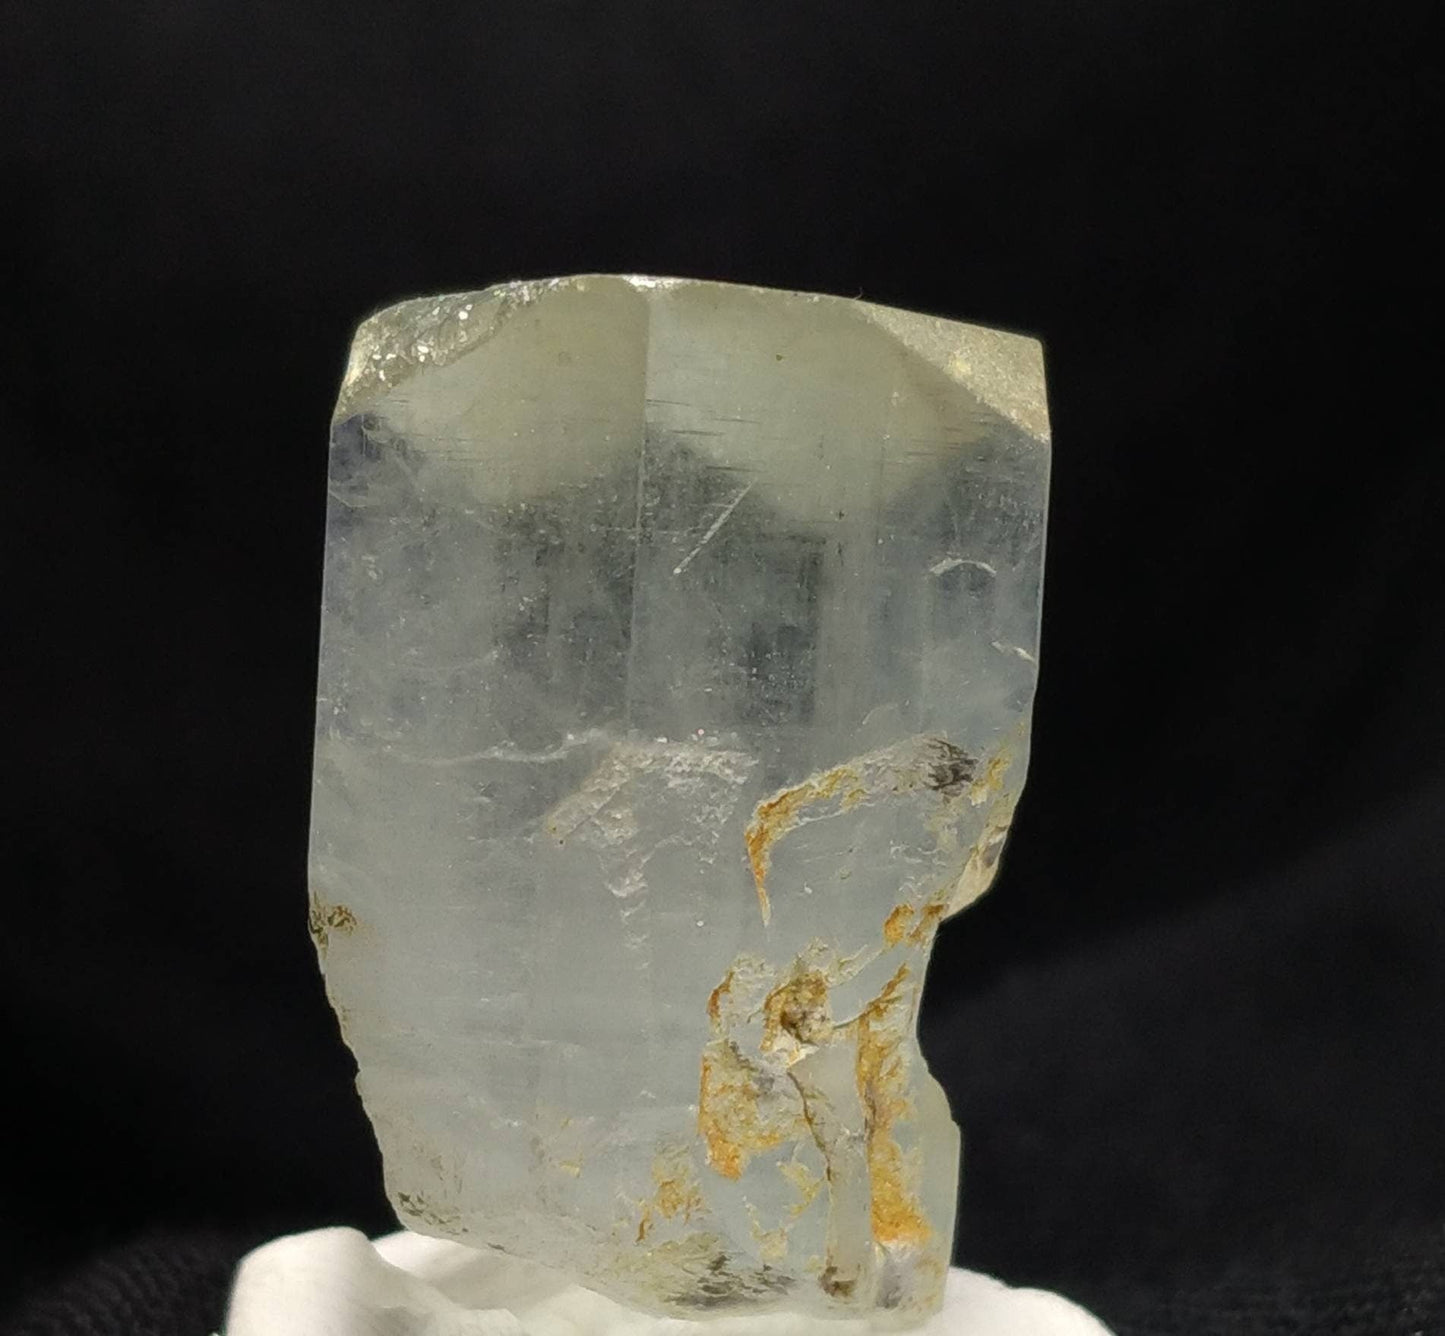 ARSAA GEMS AND MINERALSTop Quality beautiful natural 23.1 grams terminated Aquamarine crystal - Premium  from ARSAA GEMS AND MINERALS - Just $100.00! Shop now at ARSAA GEMS AND MINERALS